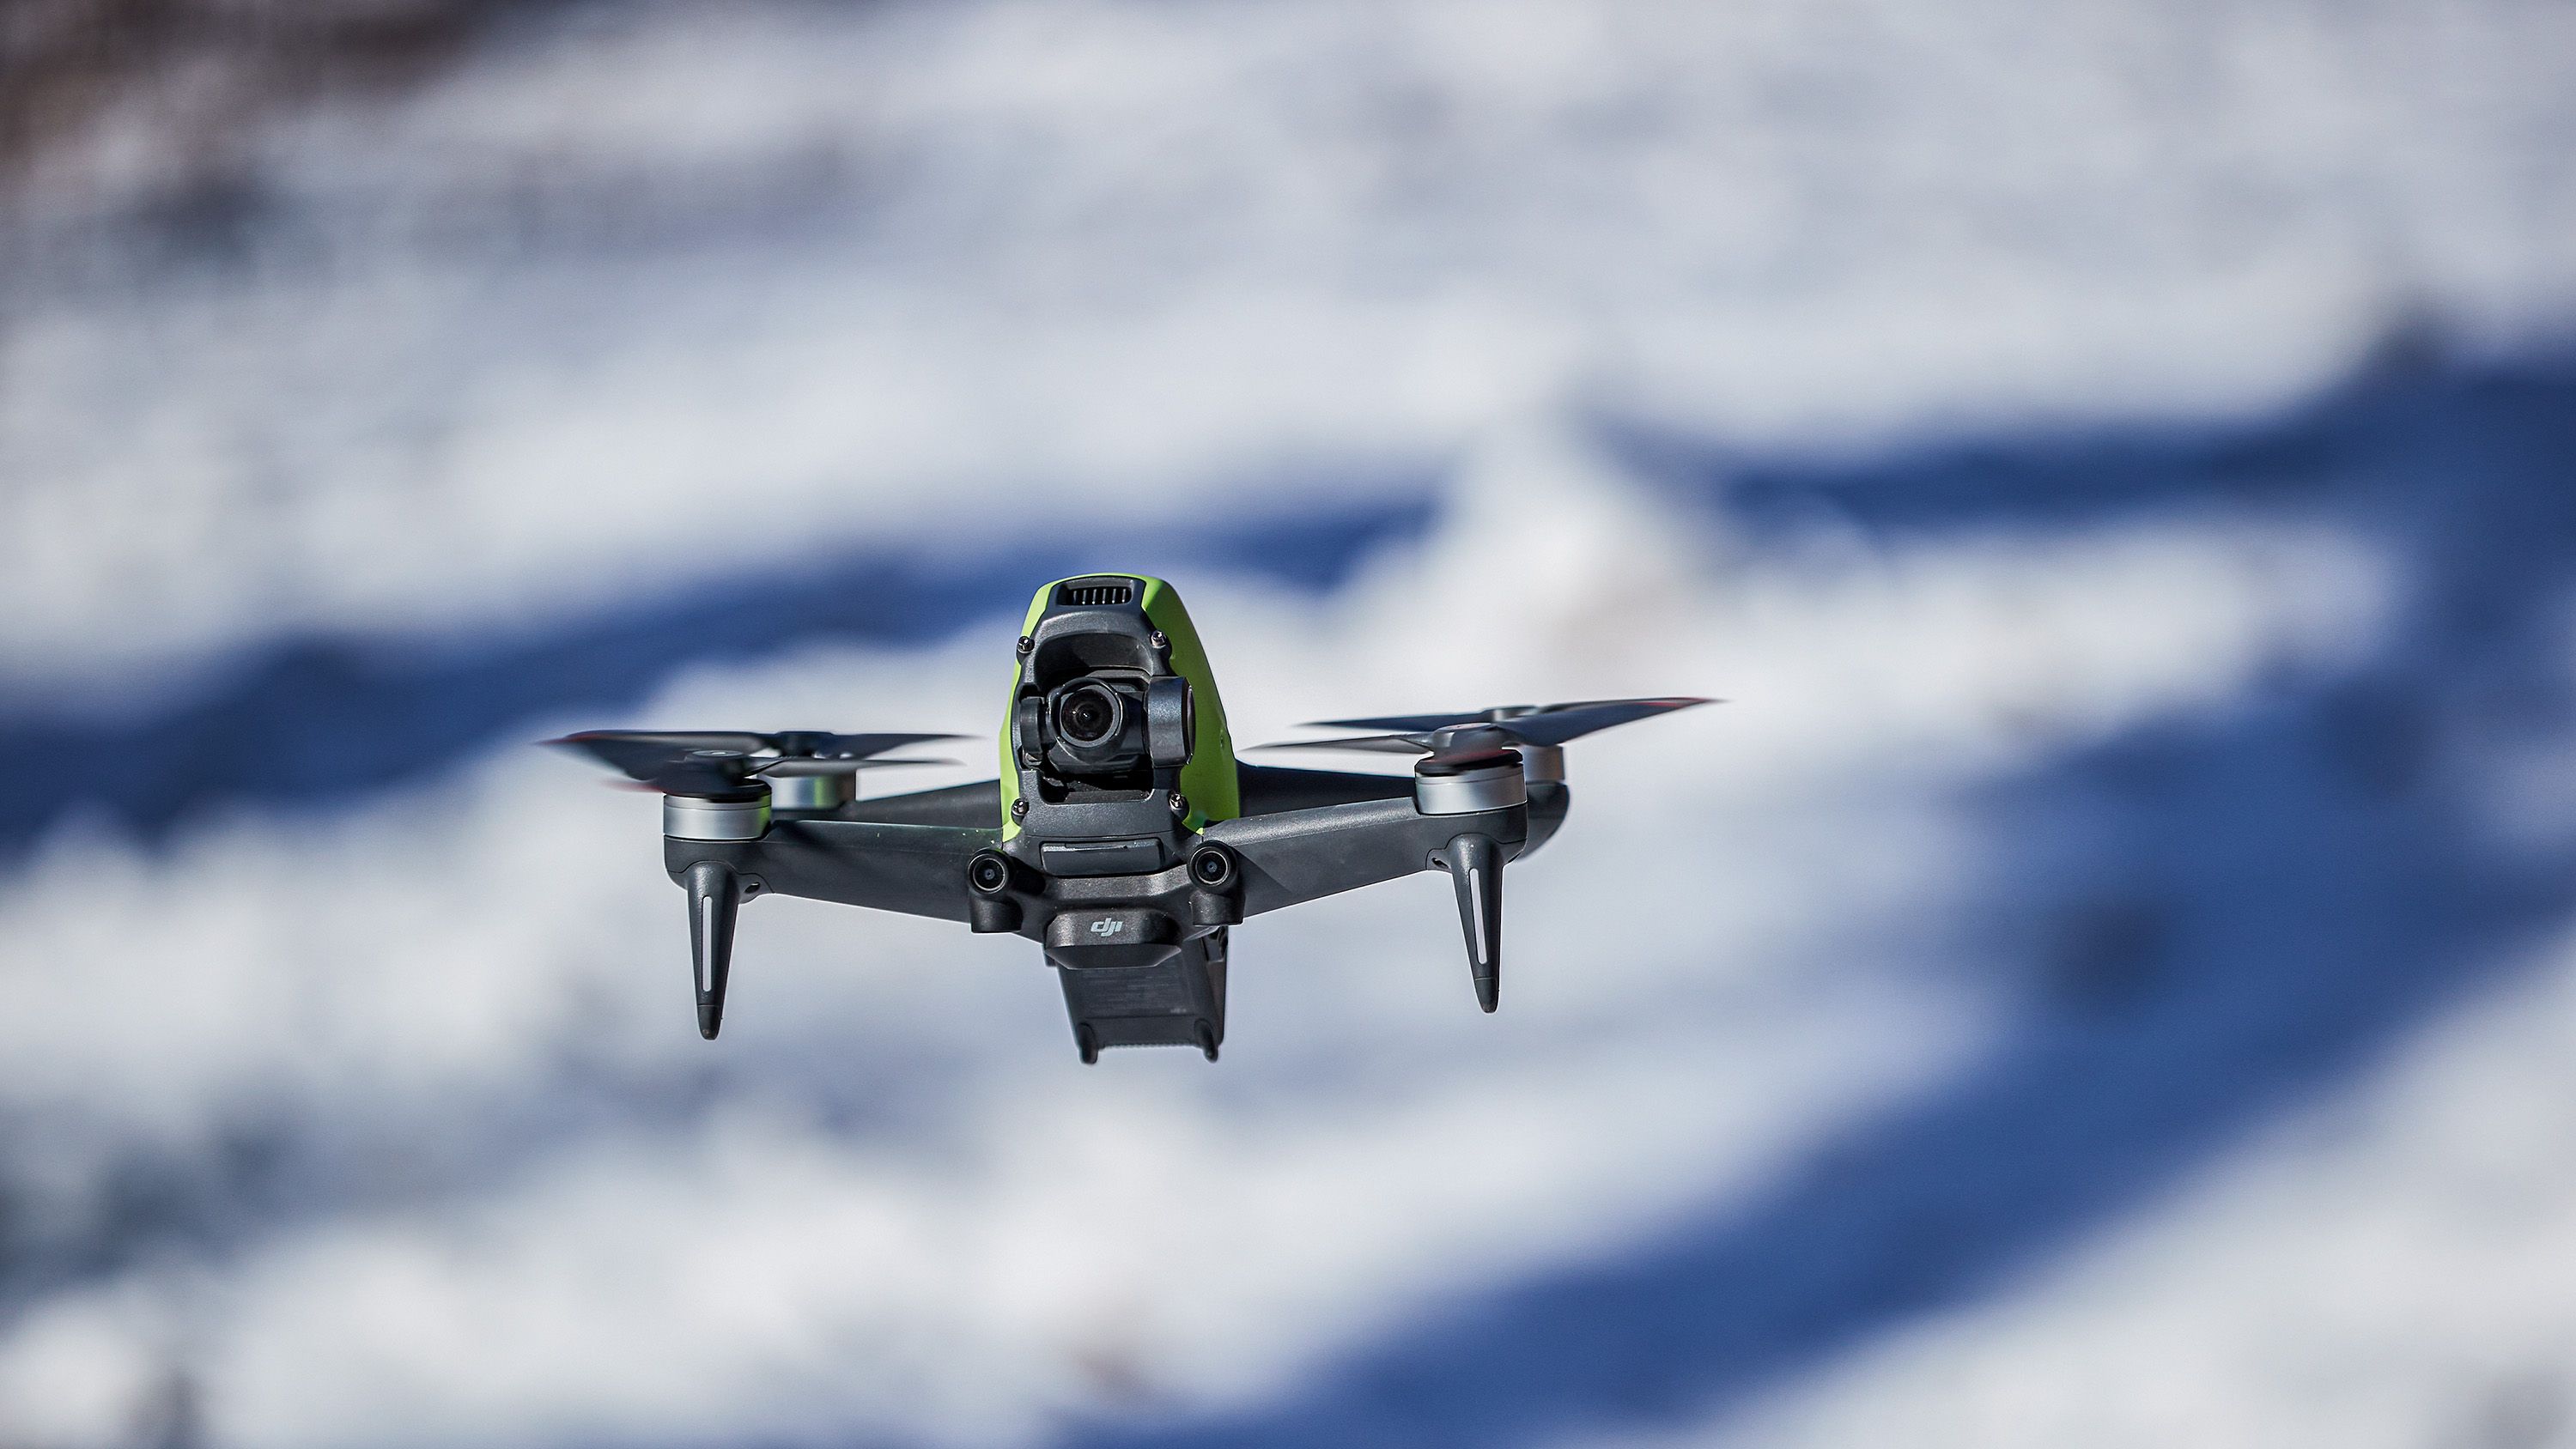 Stealth Bird 4K Drone Reviews: Unbiased Analysis and Expert Opinion